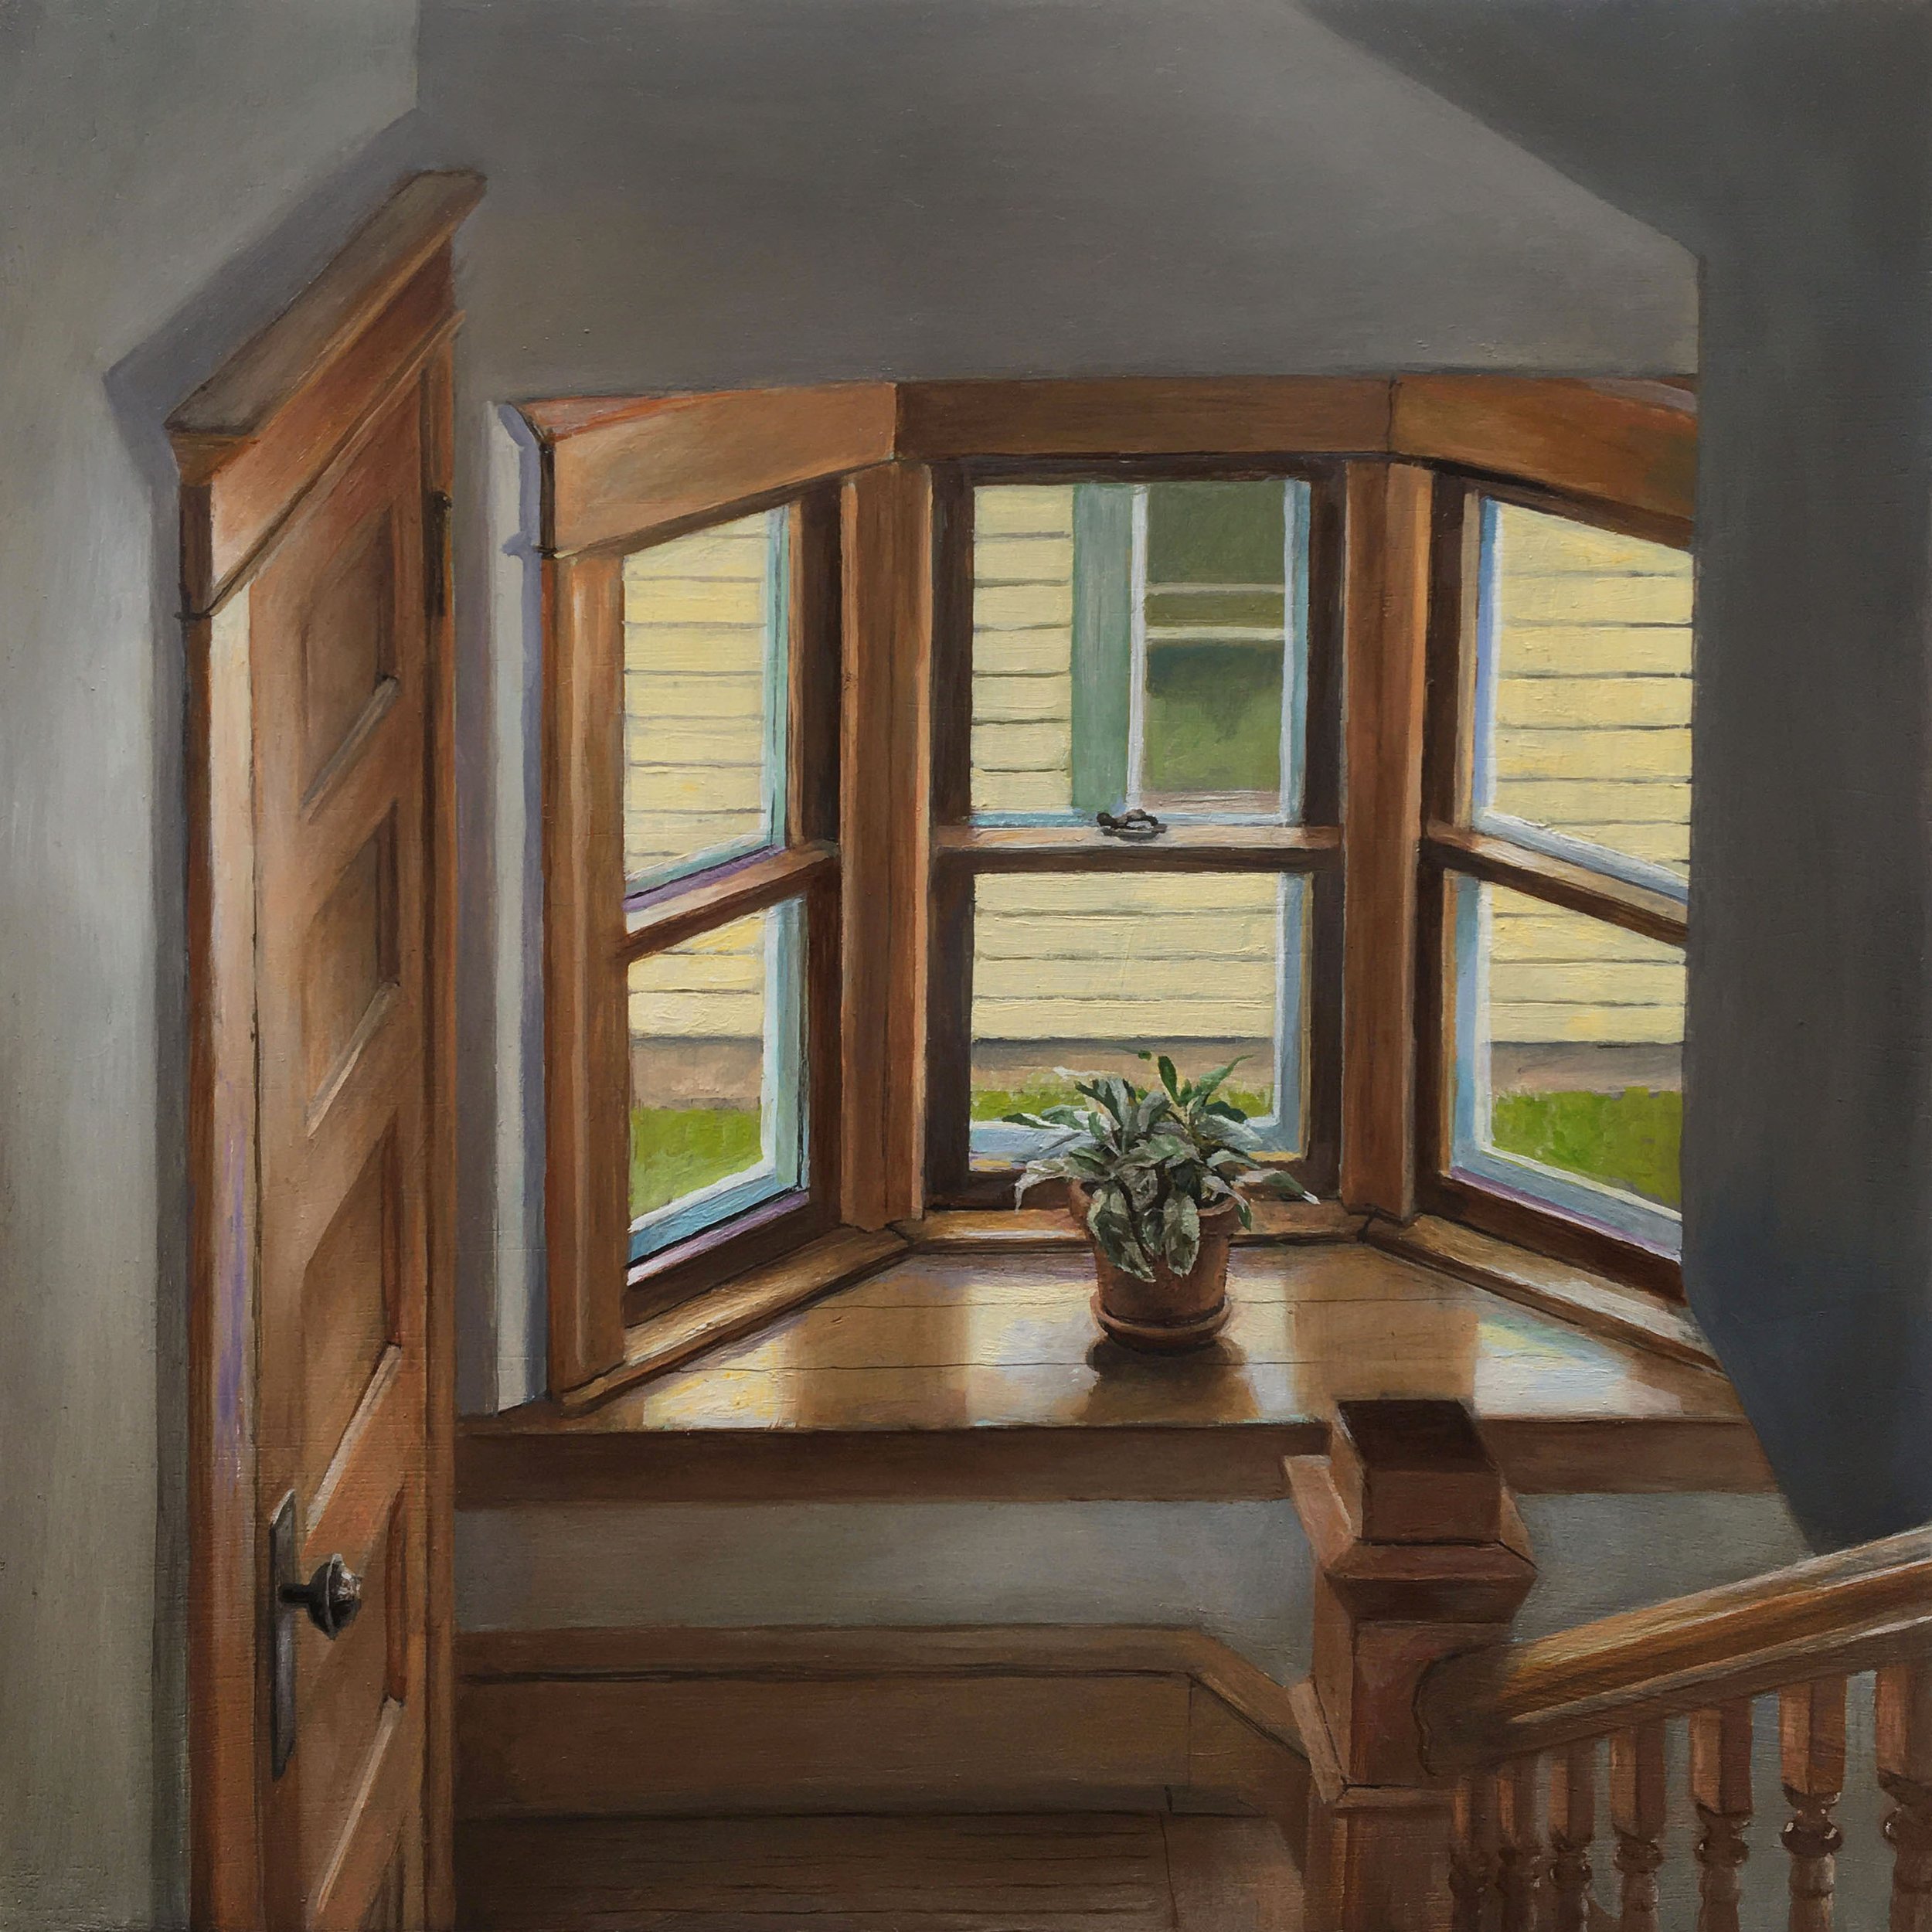   Bay Window   2022  Oil on panel  10 x 10 inches   